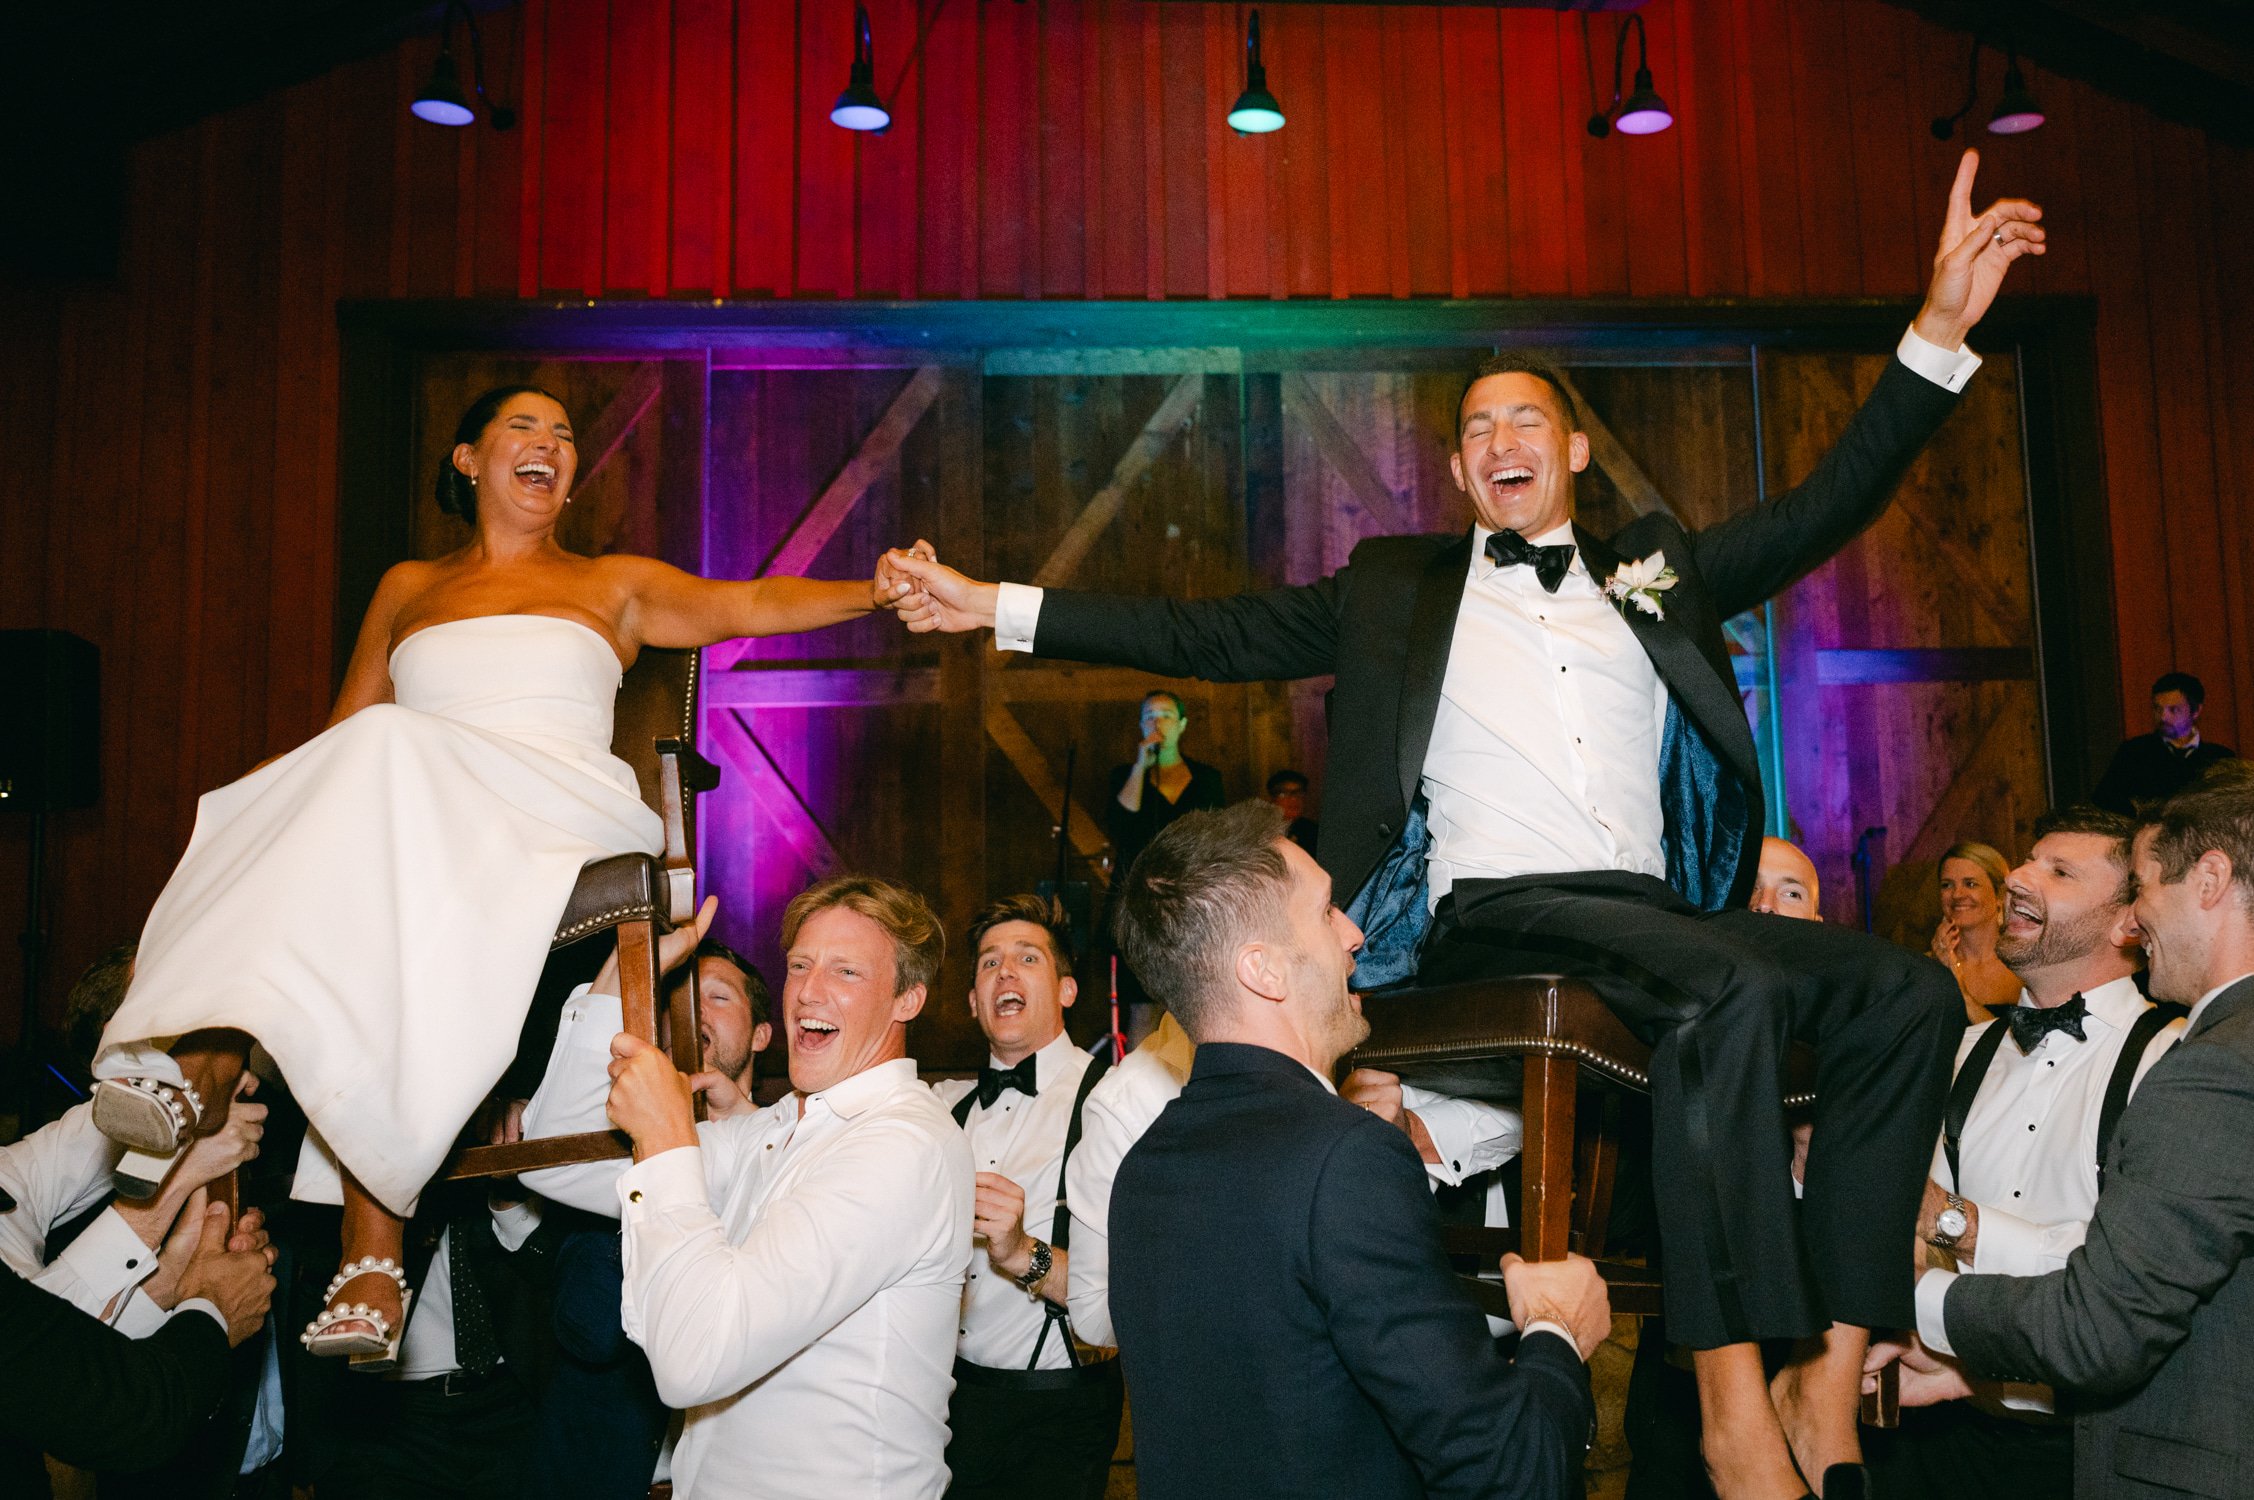 Martis Camp Wedding, photo of the couple being carried during the afterparty